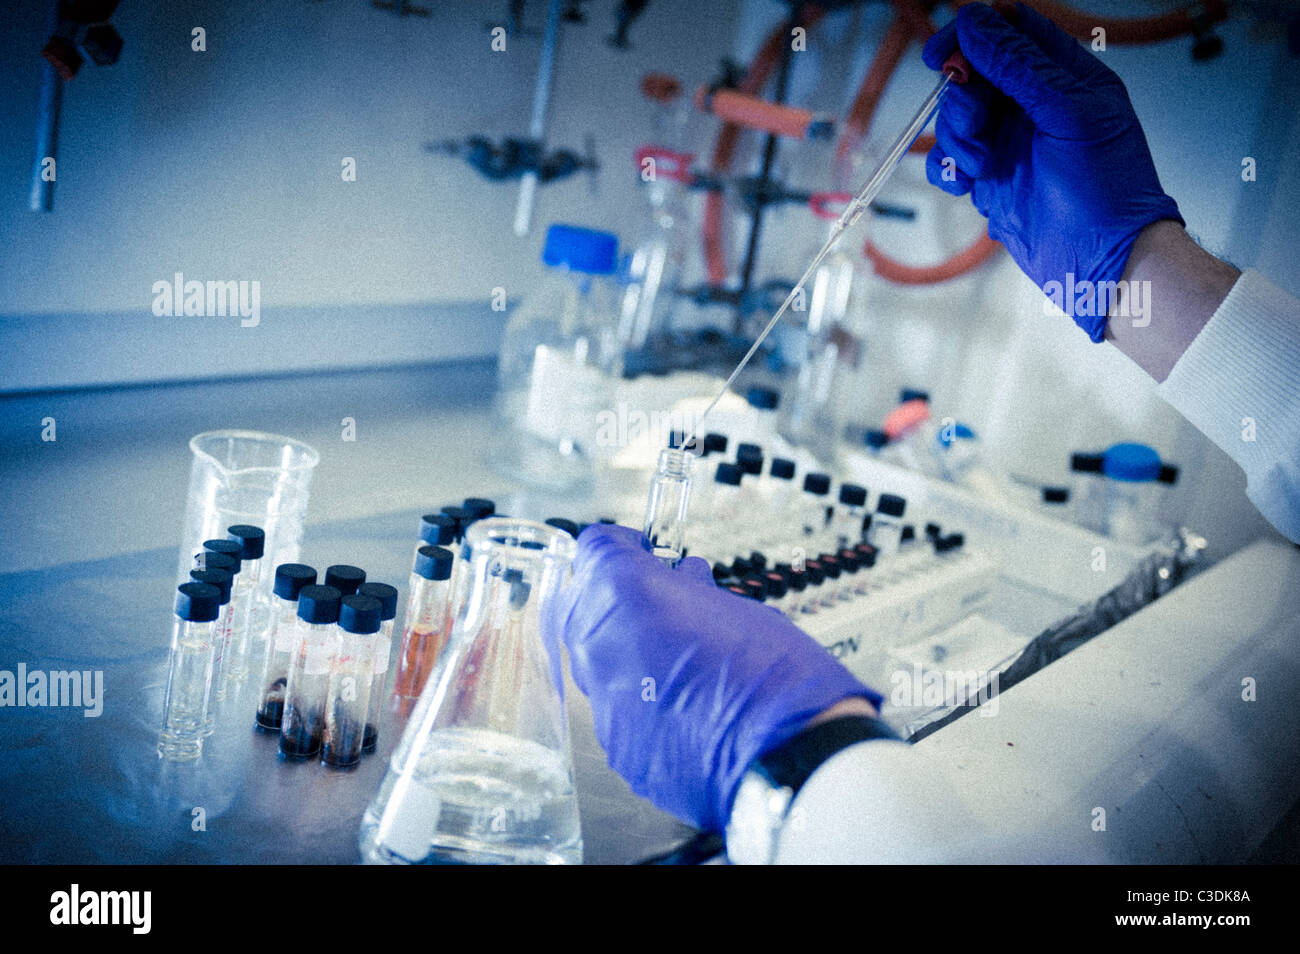 Close up of male scientist wearing white lab coat goggles and purple gloves working at fume cupboard with pipette and flasks Stock Photo